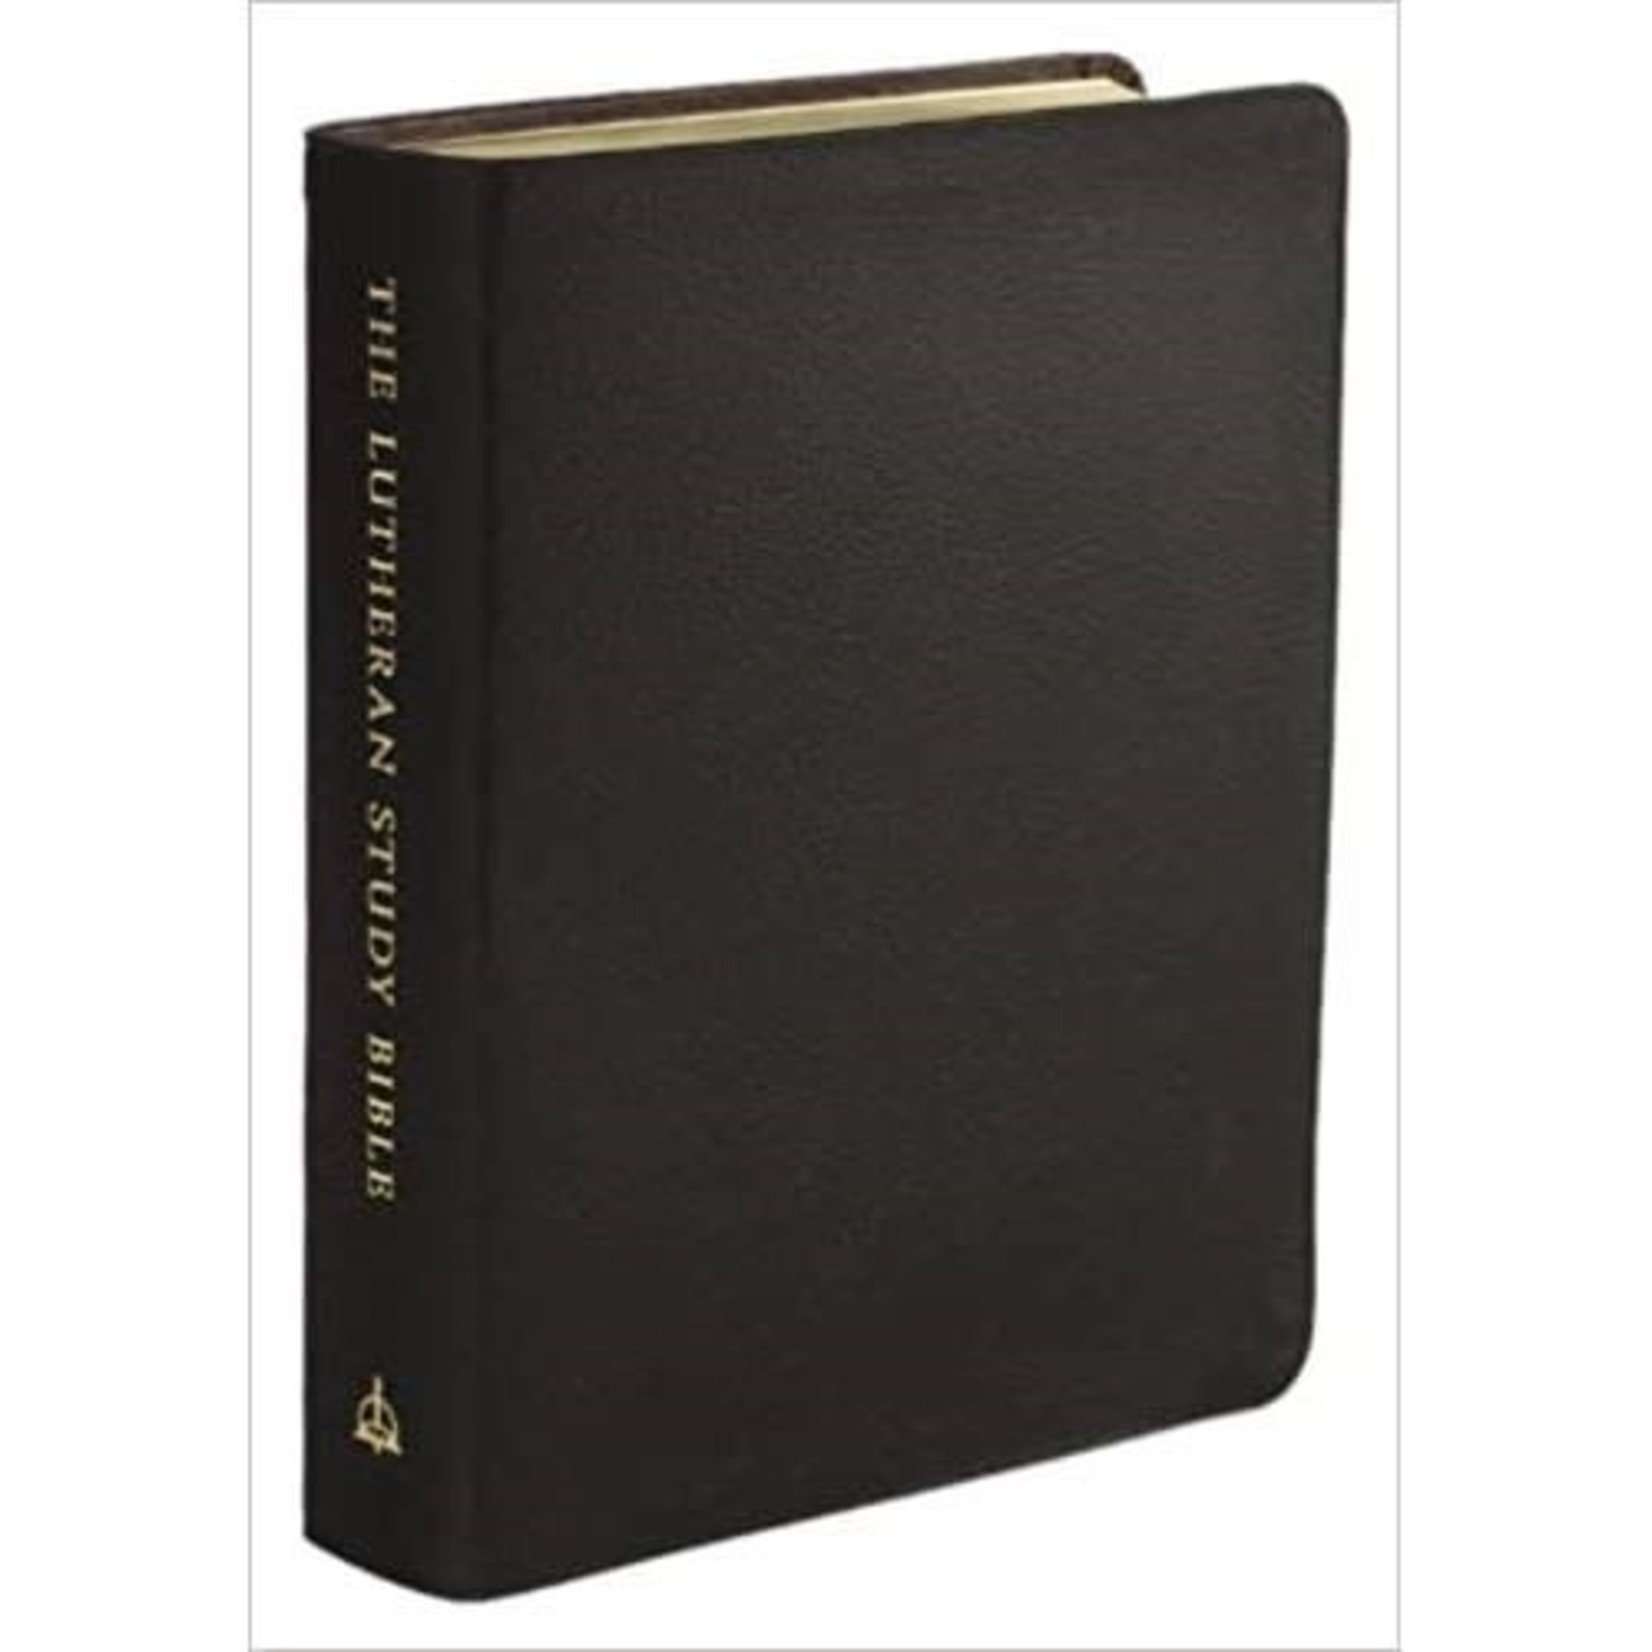 The Lutheran Study Bible (ESV) English Standard Version Genuine Leather Black Thumb Indexed [012034]